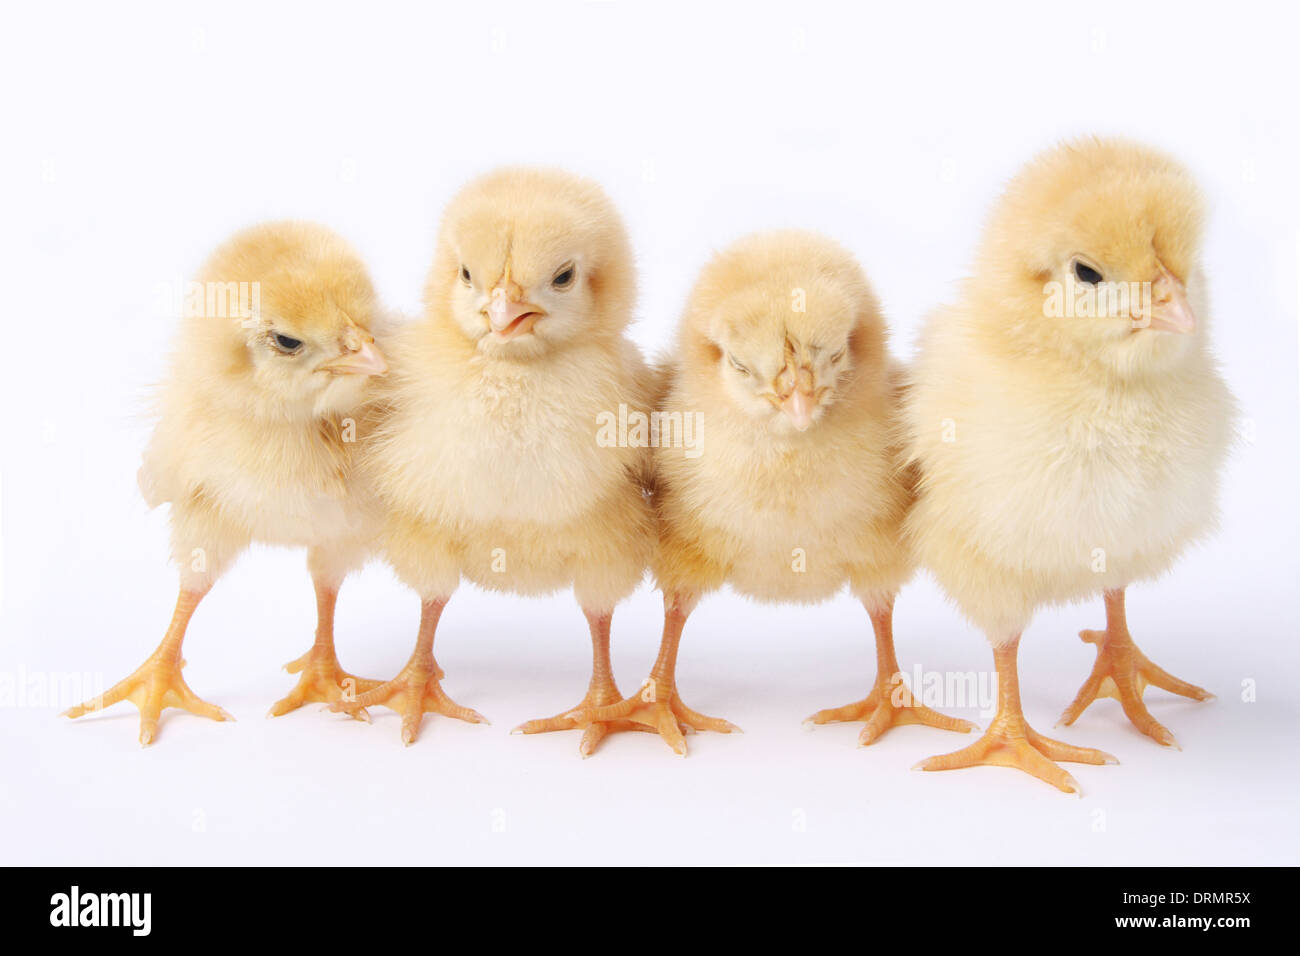 a row of chick Stock Photo